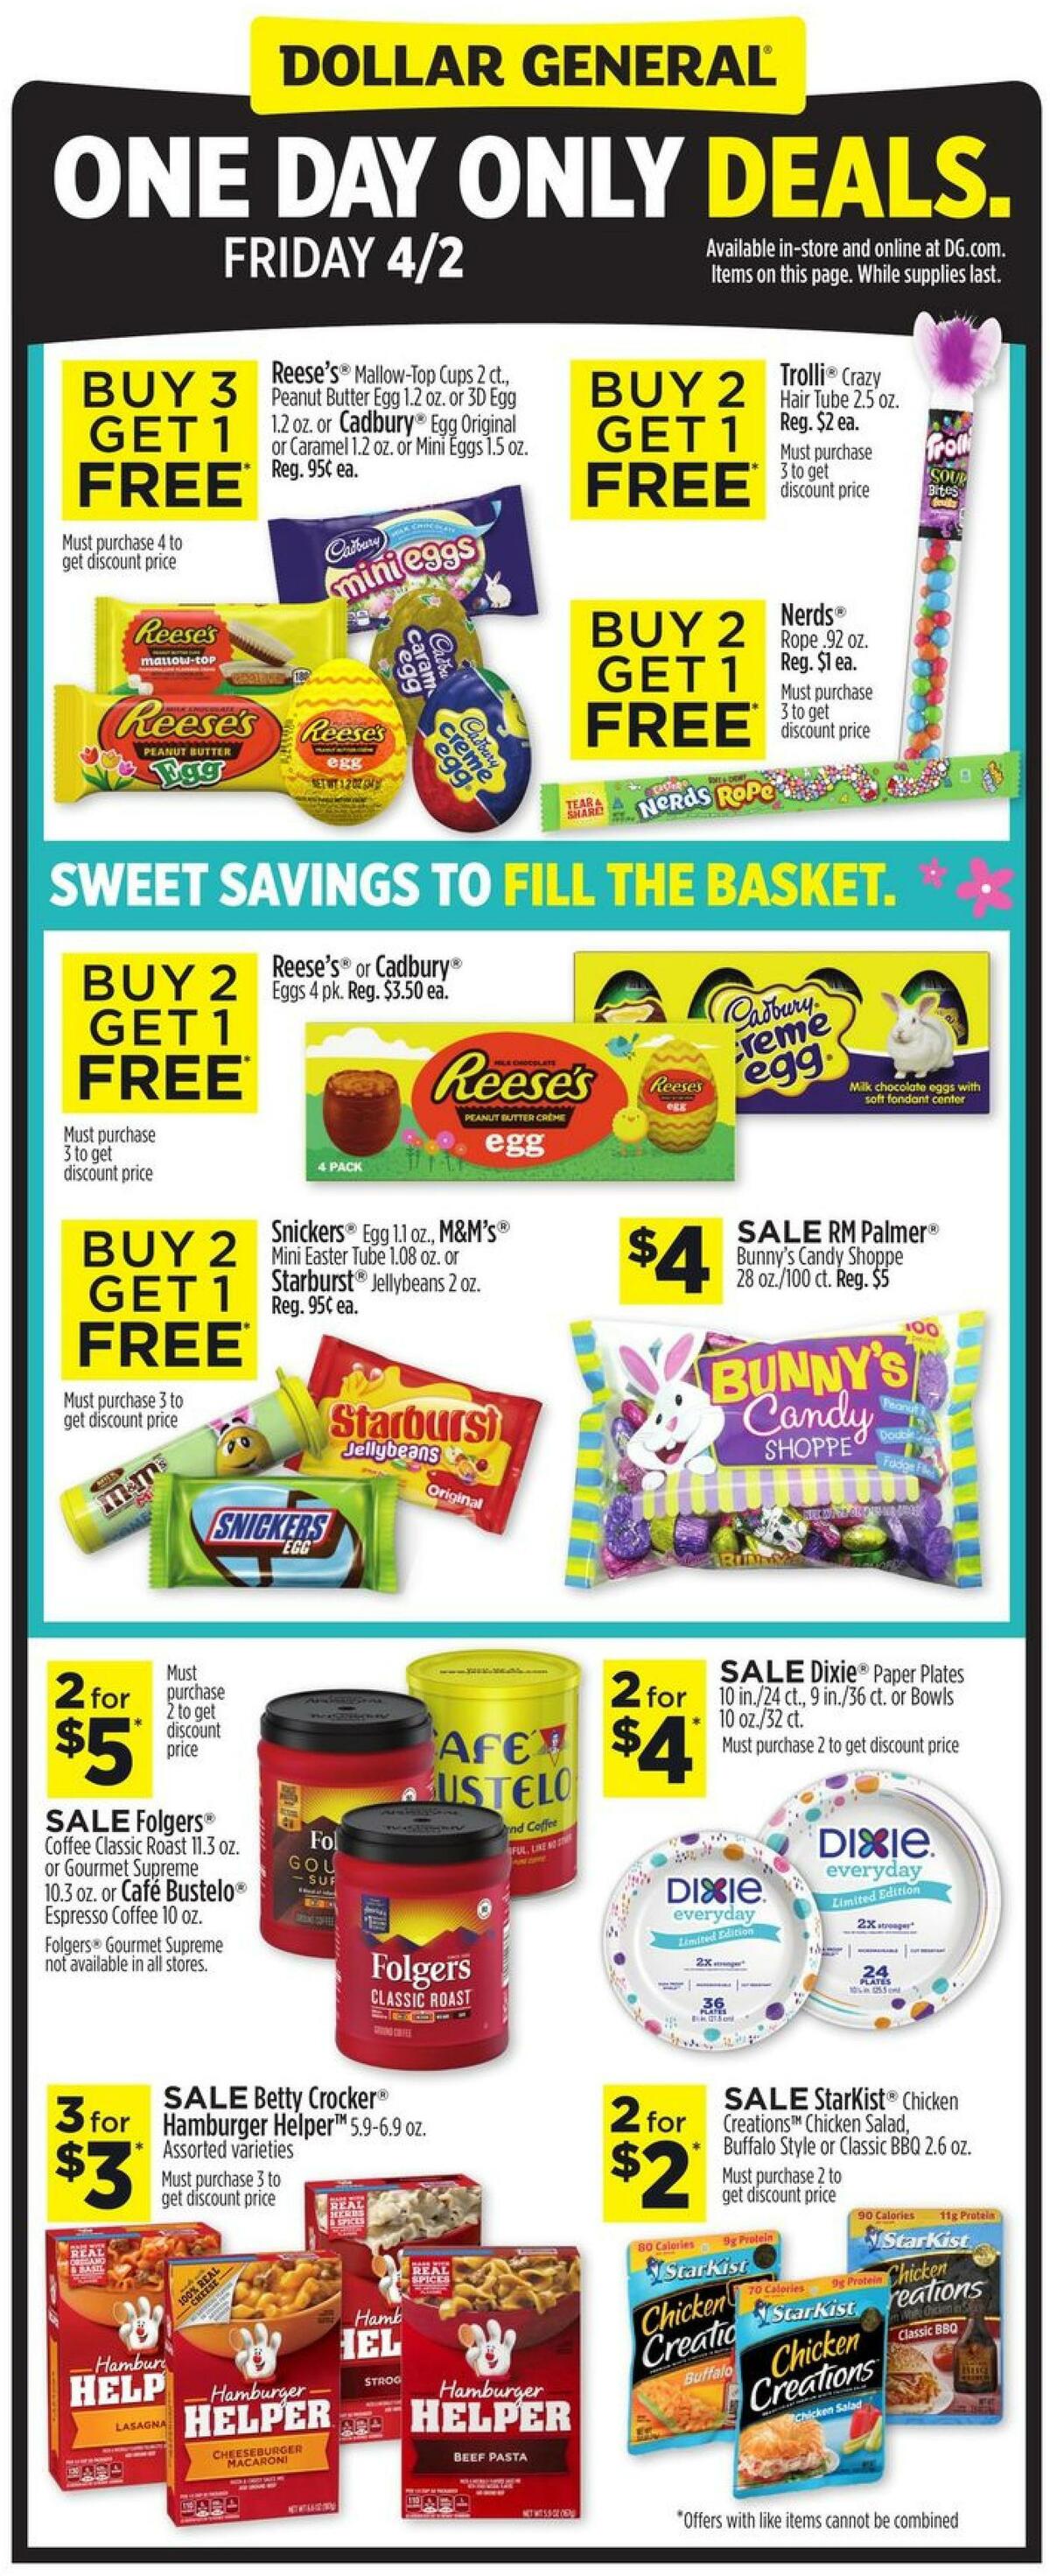 Dollar General One Day Deals Weekly Ad from April 2